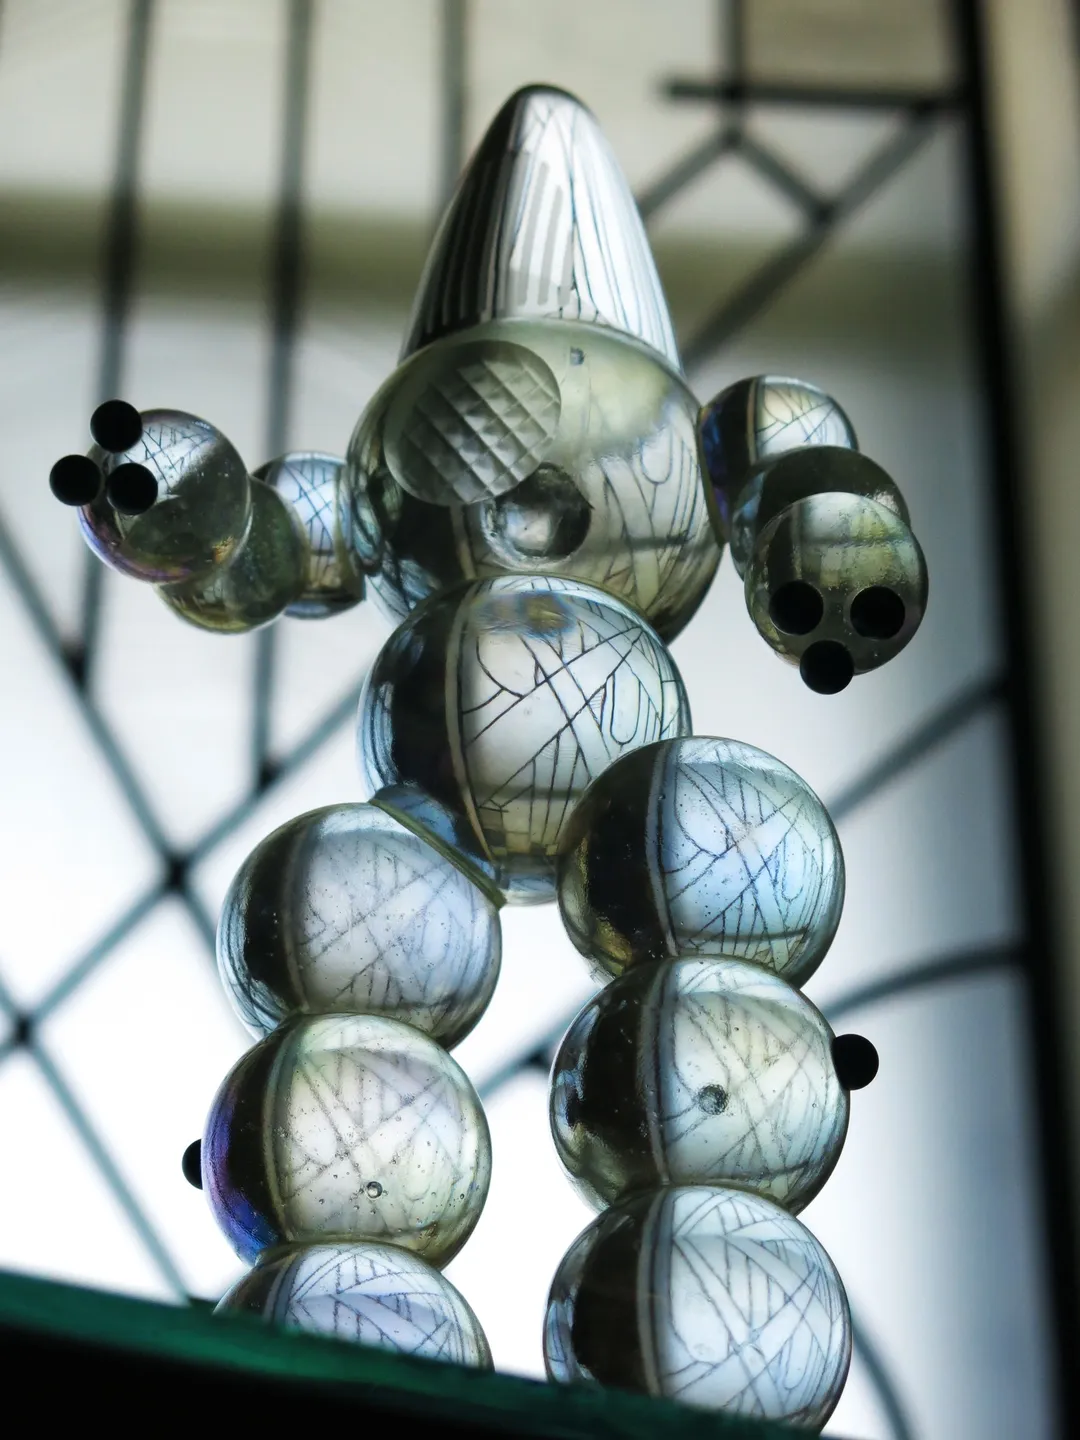 A glass sculpture of a person with many balls.